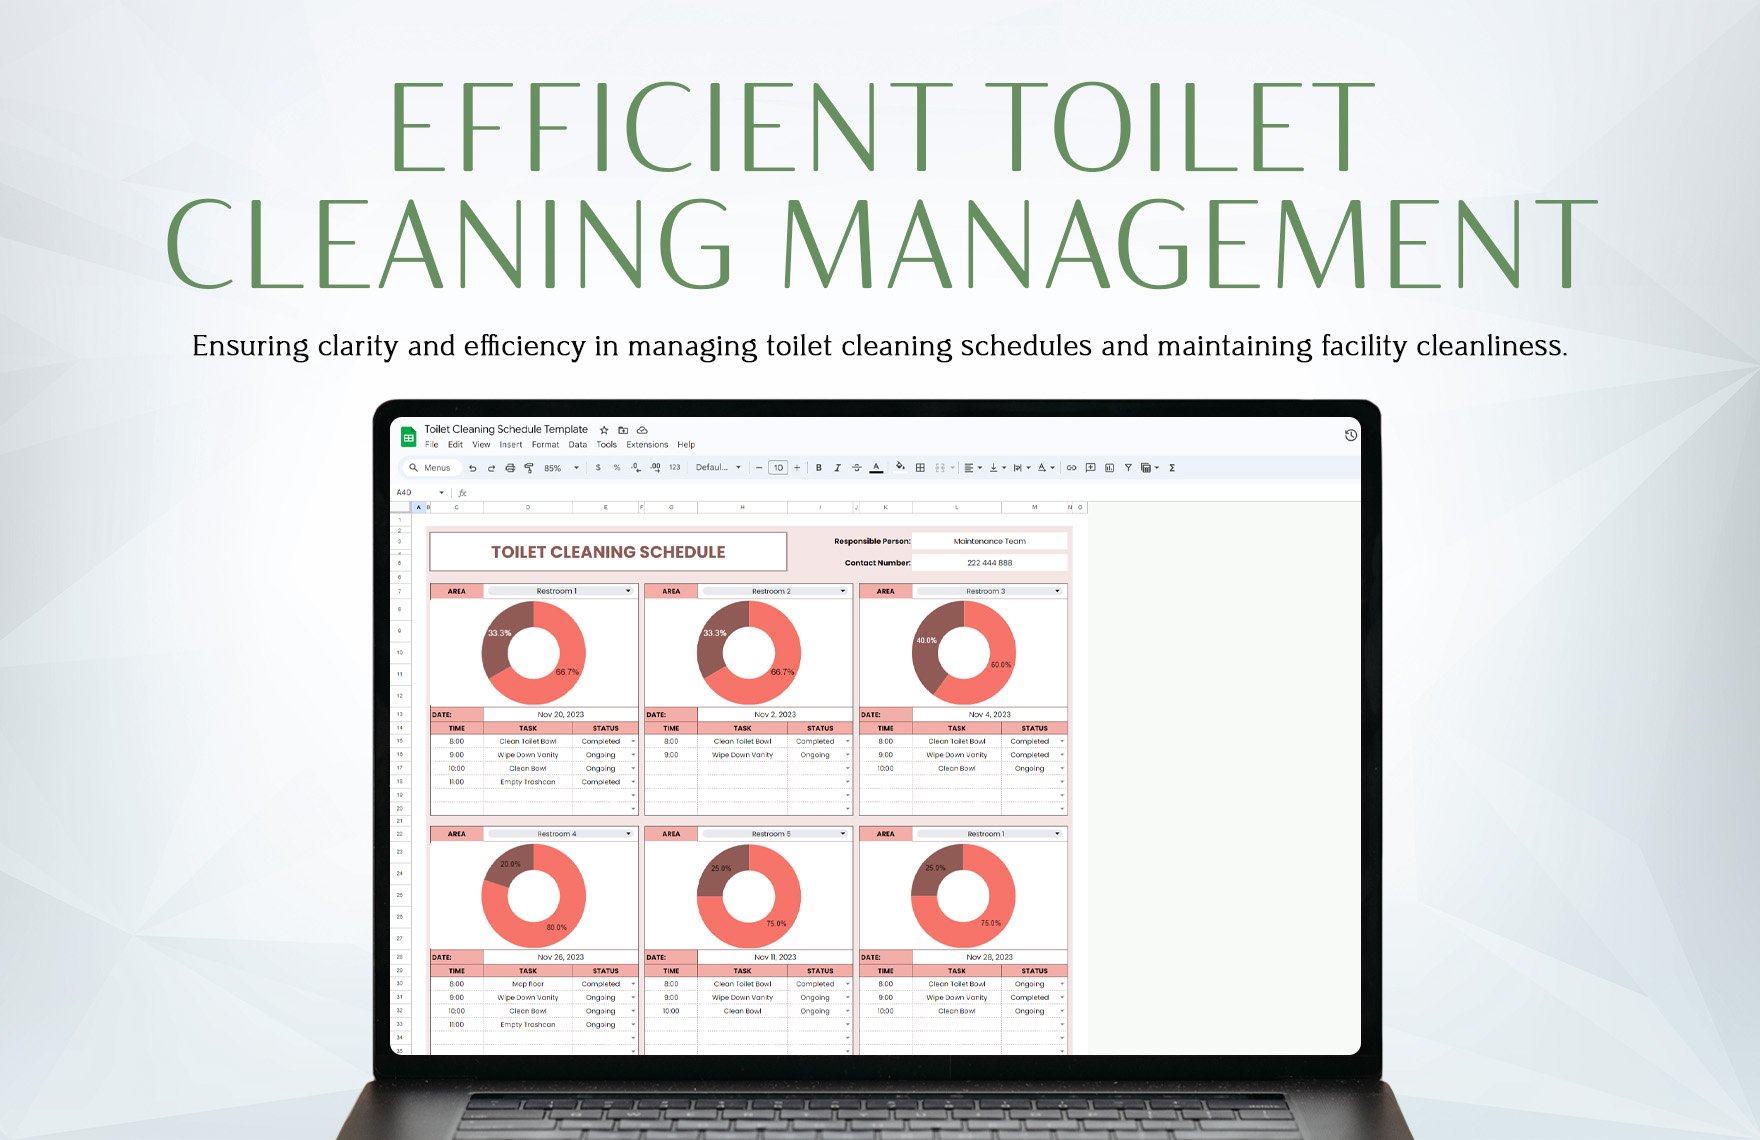 Toilet Cleaning Schedule Template